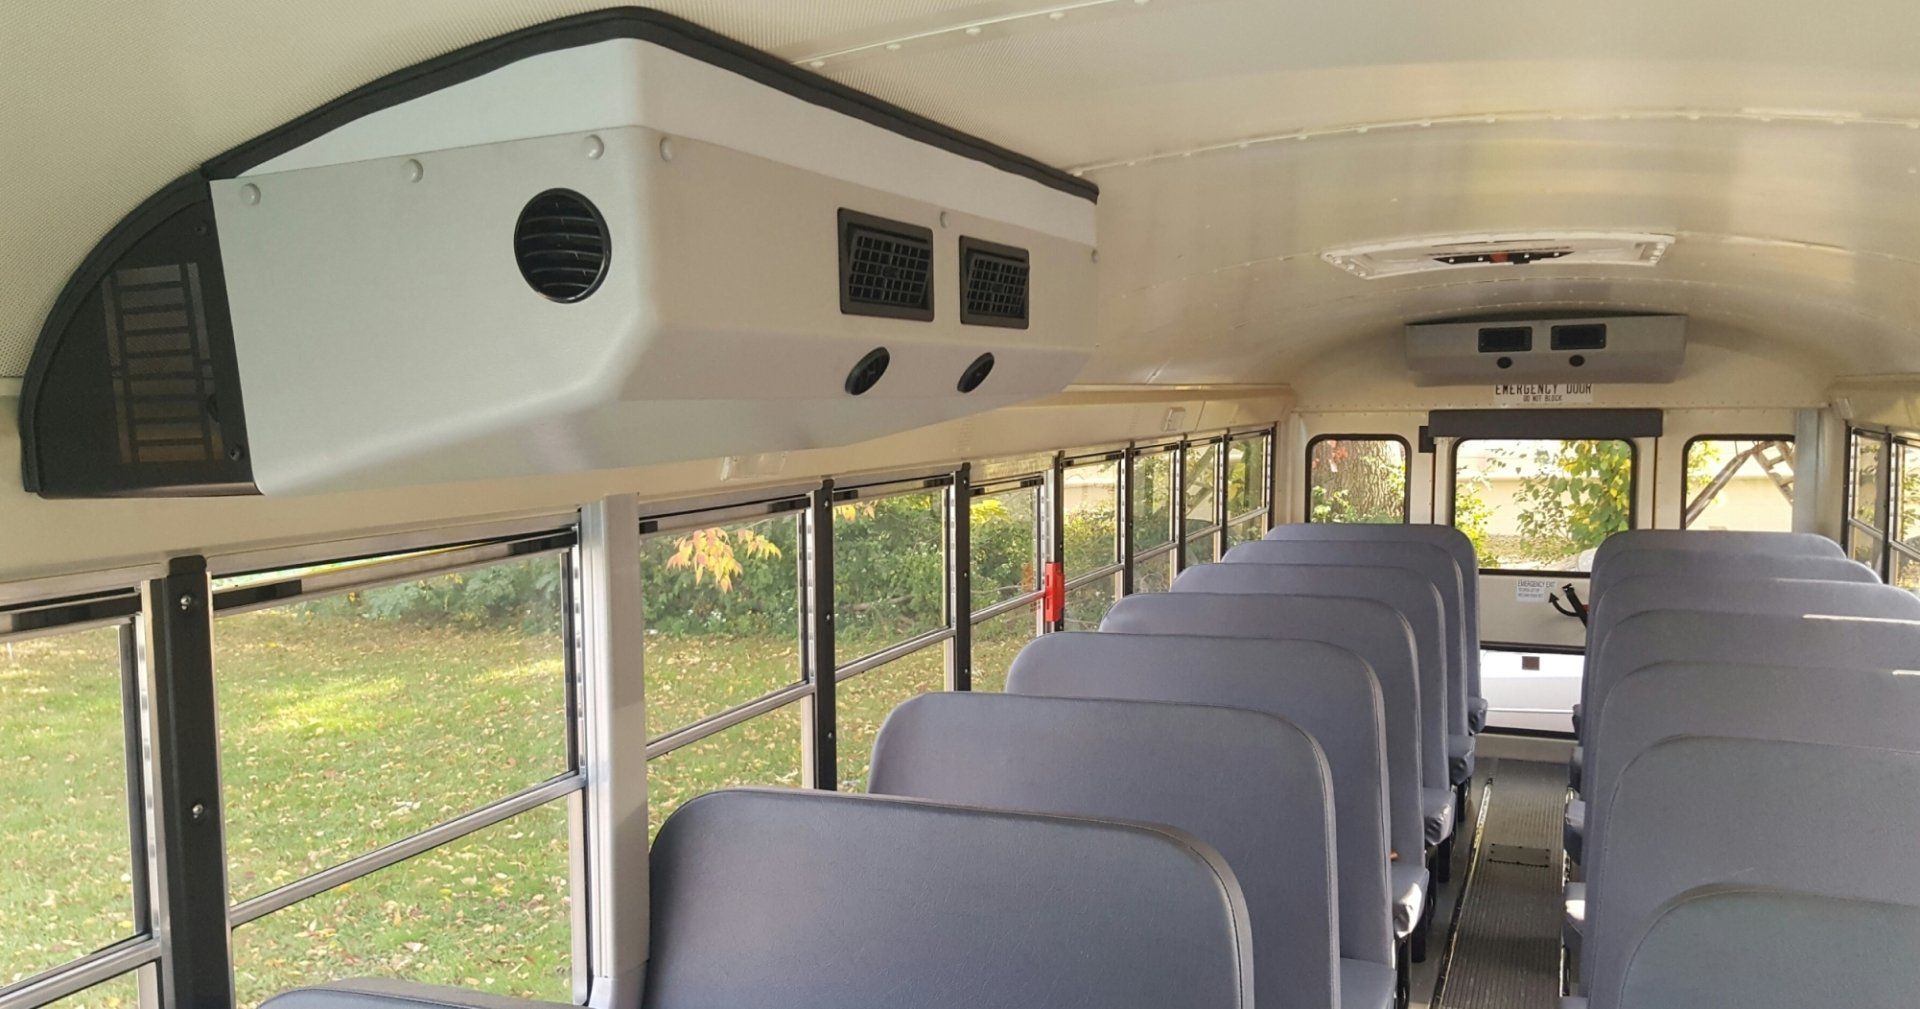 Air Condition inside a Bus — Alarm in West Chester, PA